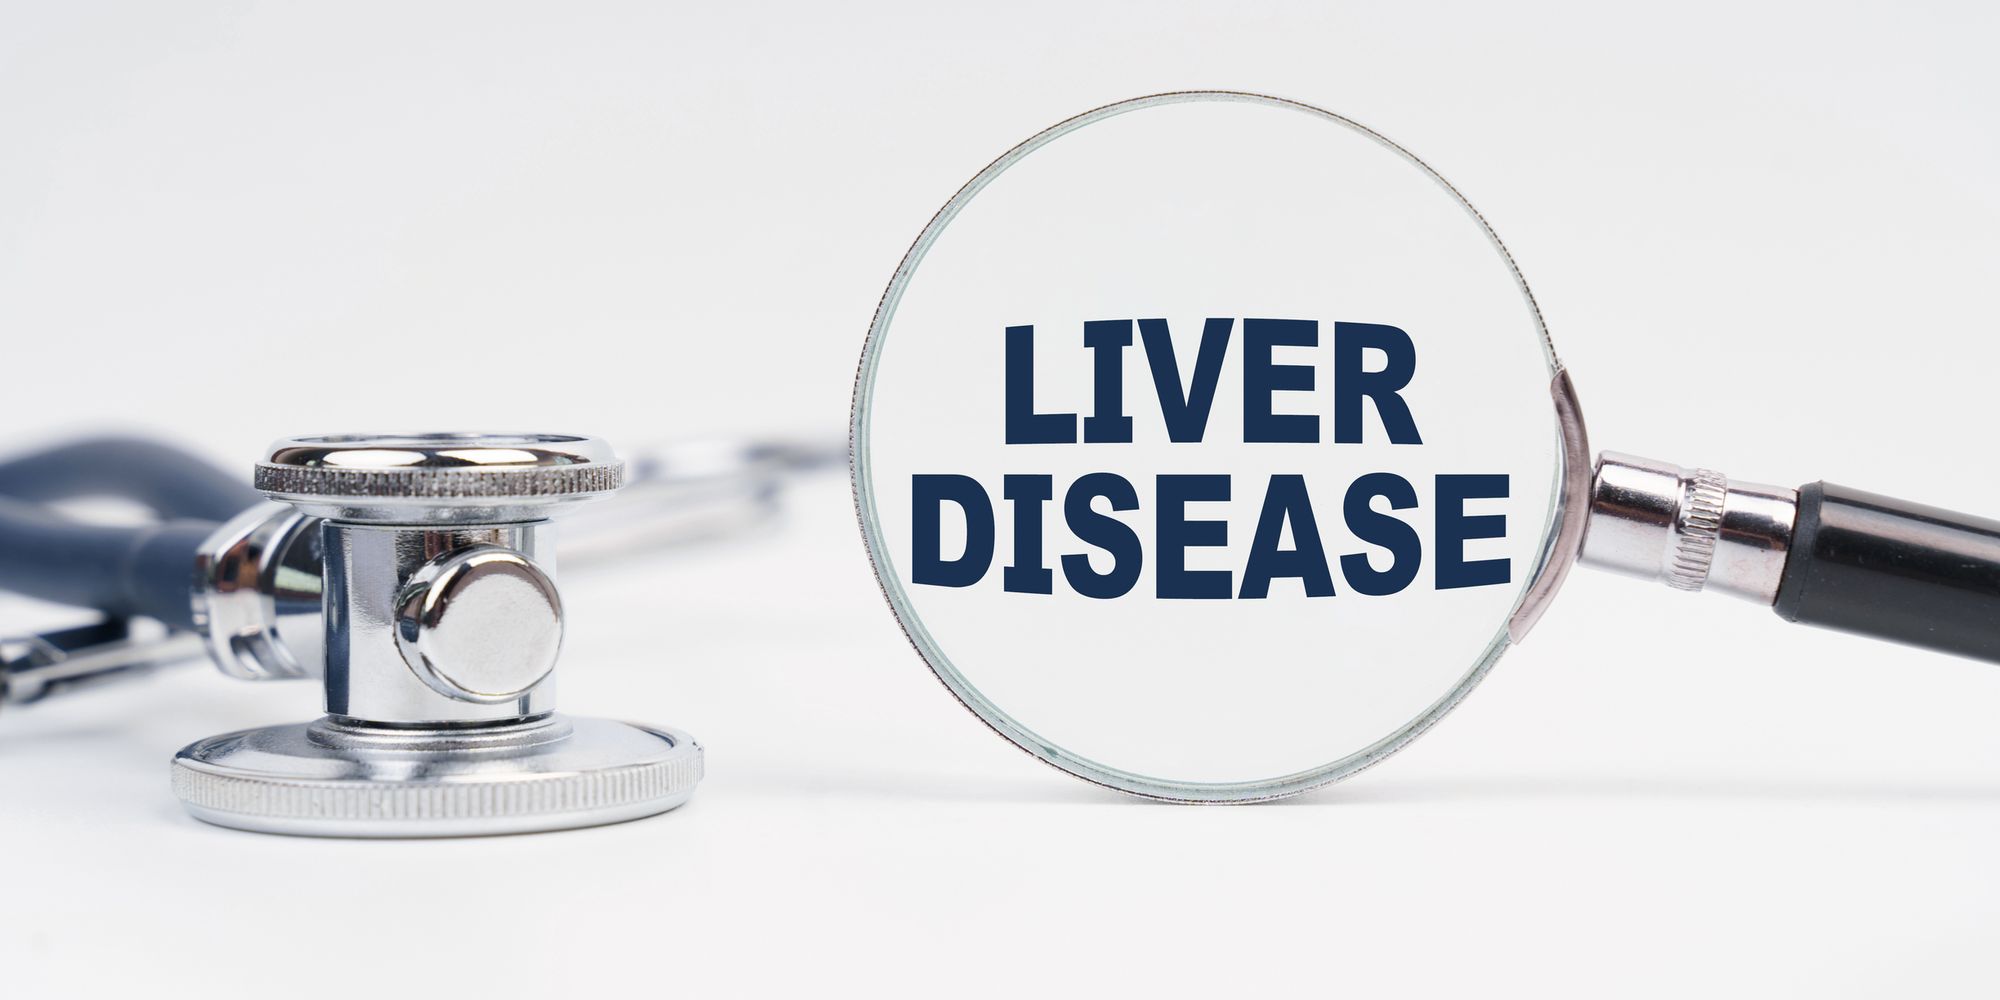                      How to manage symptoms of liver disease                             
                     